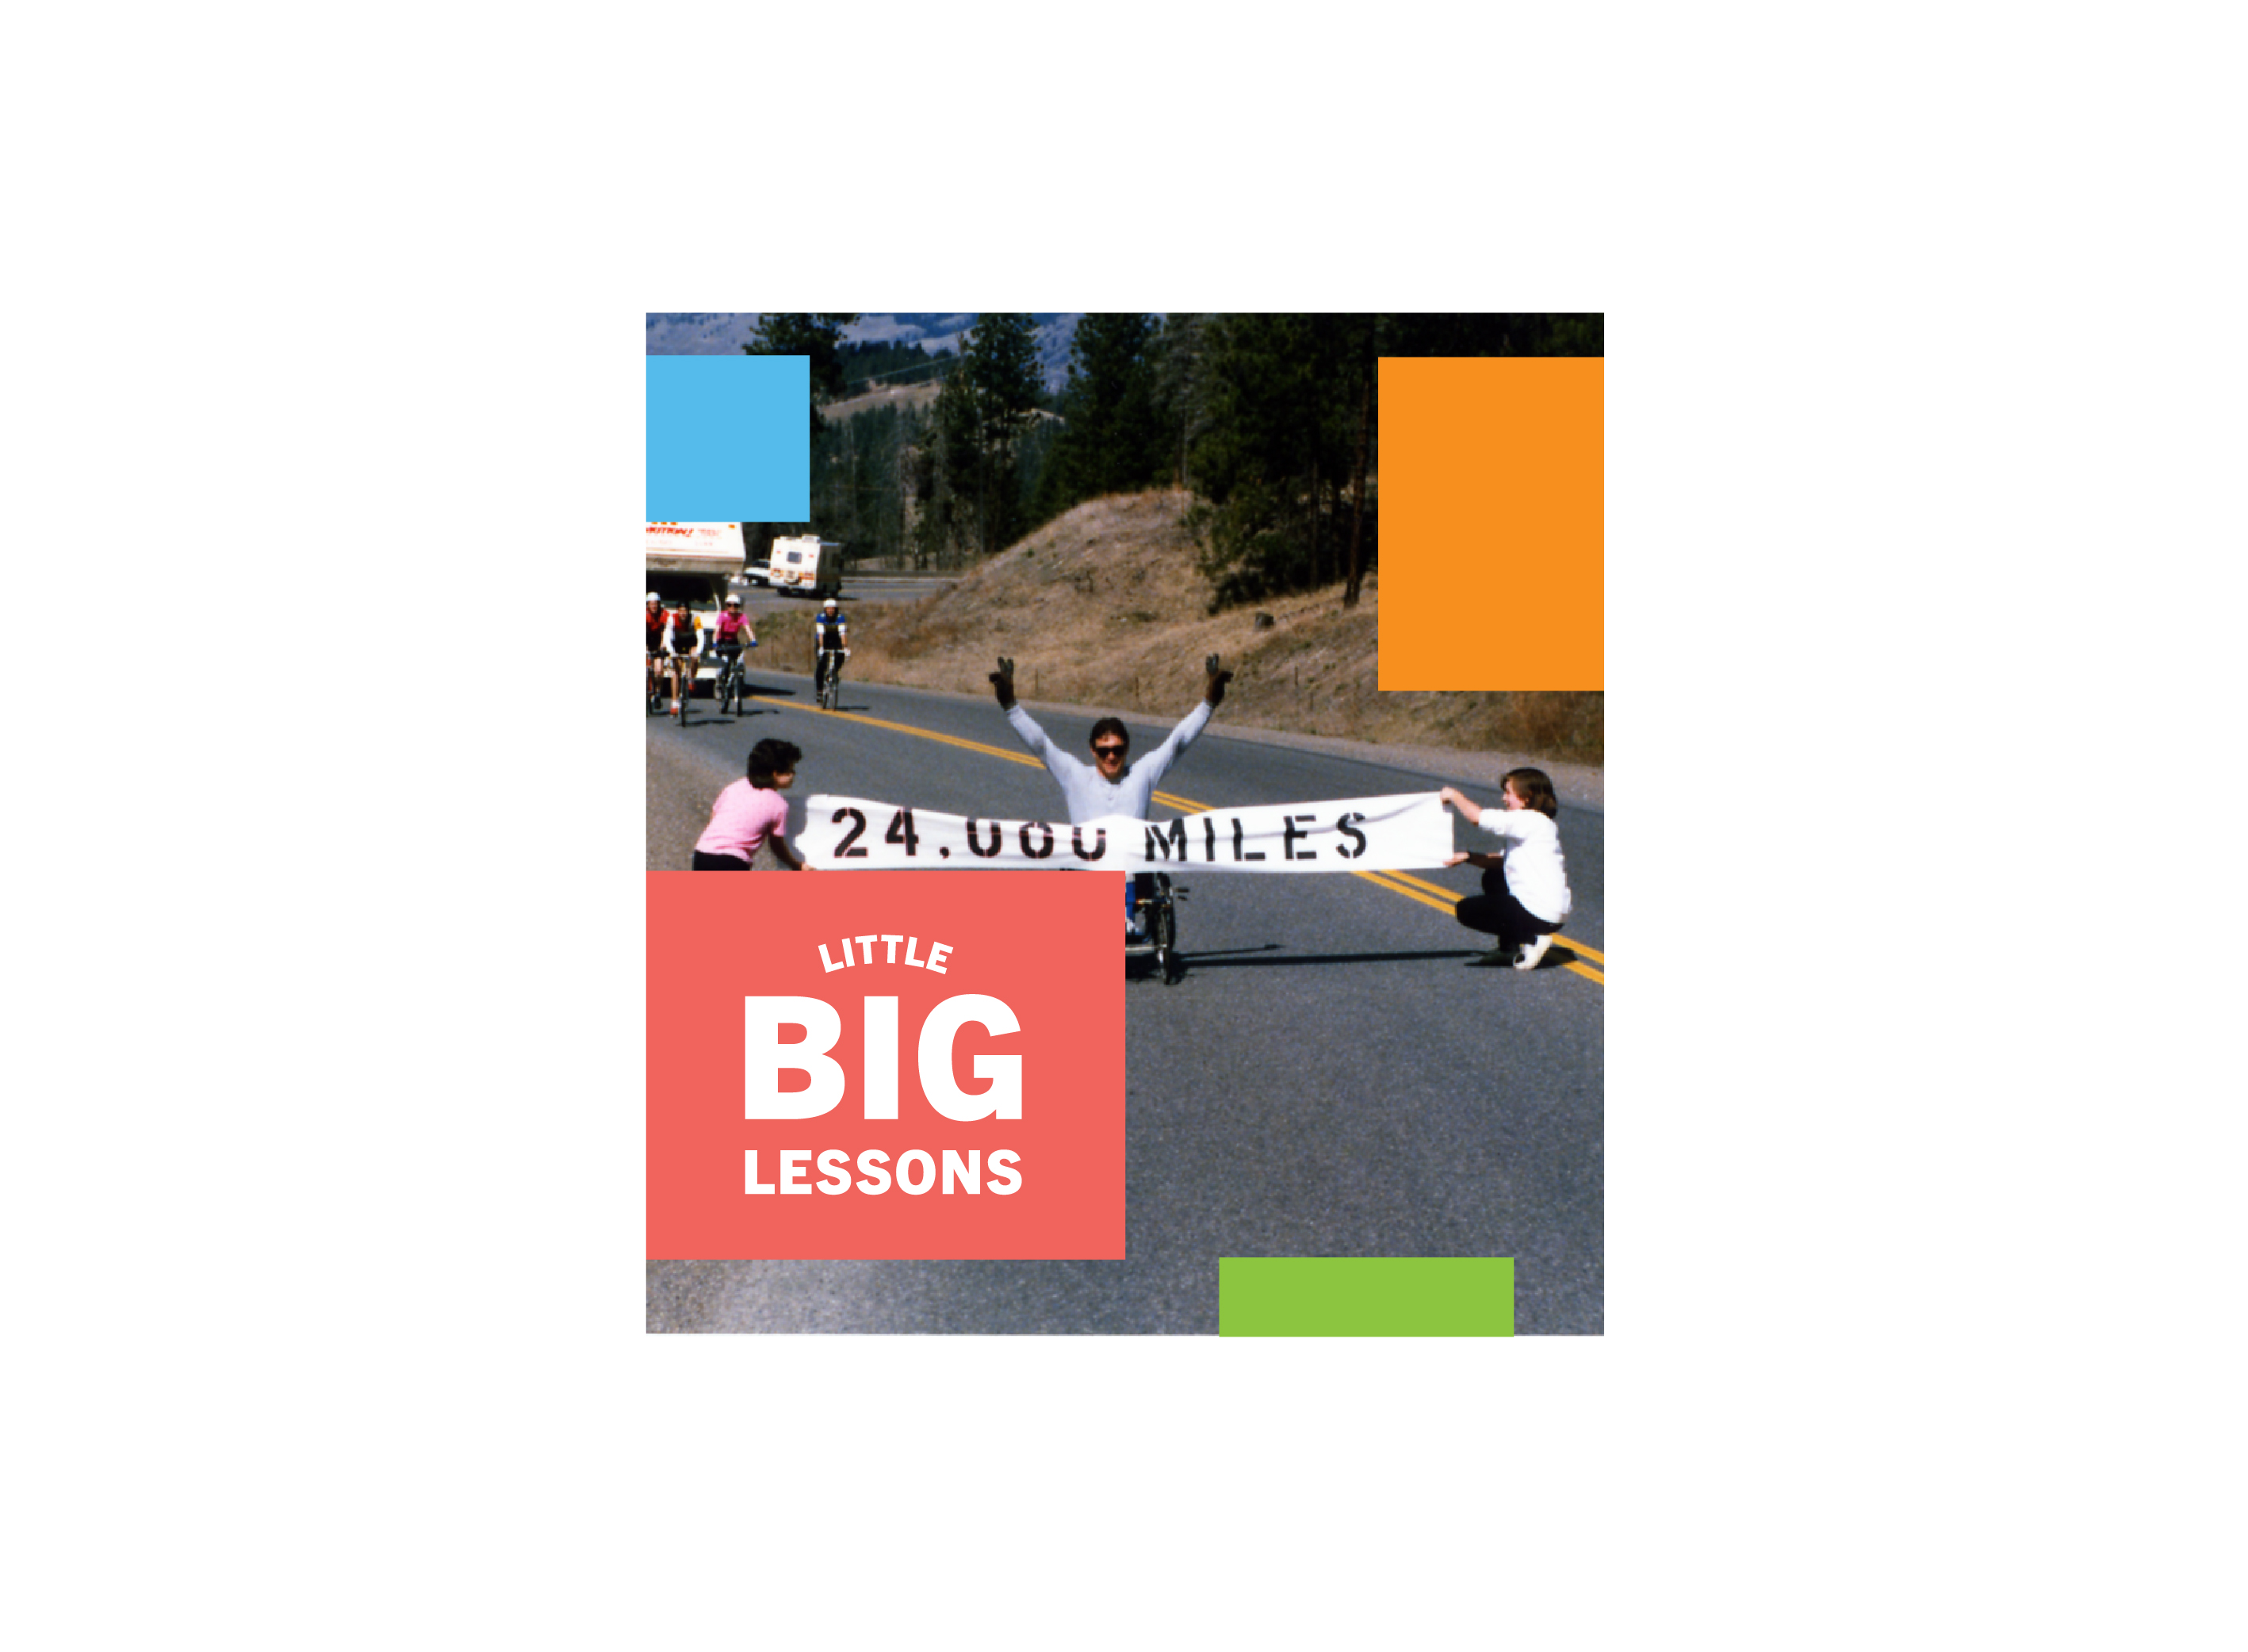 Rick Hansen celebratorily wheeling with his arms raised, into a banner that says "24,000 miles" held up by two tour team members during the Man In Motion World Tour. Little Big Lessons logo text.